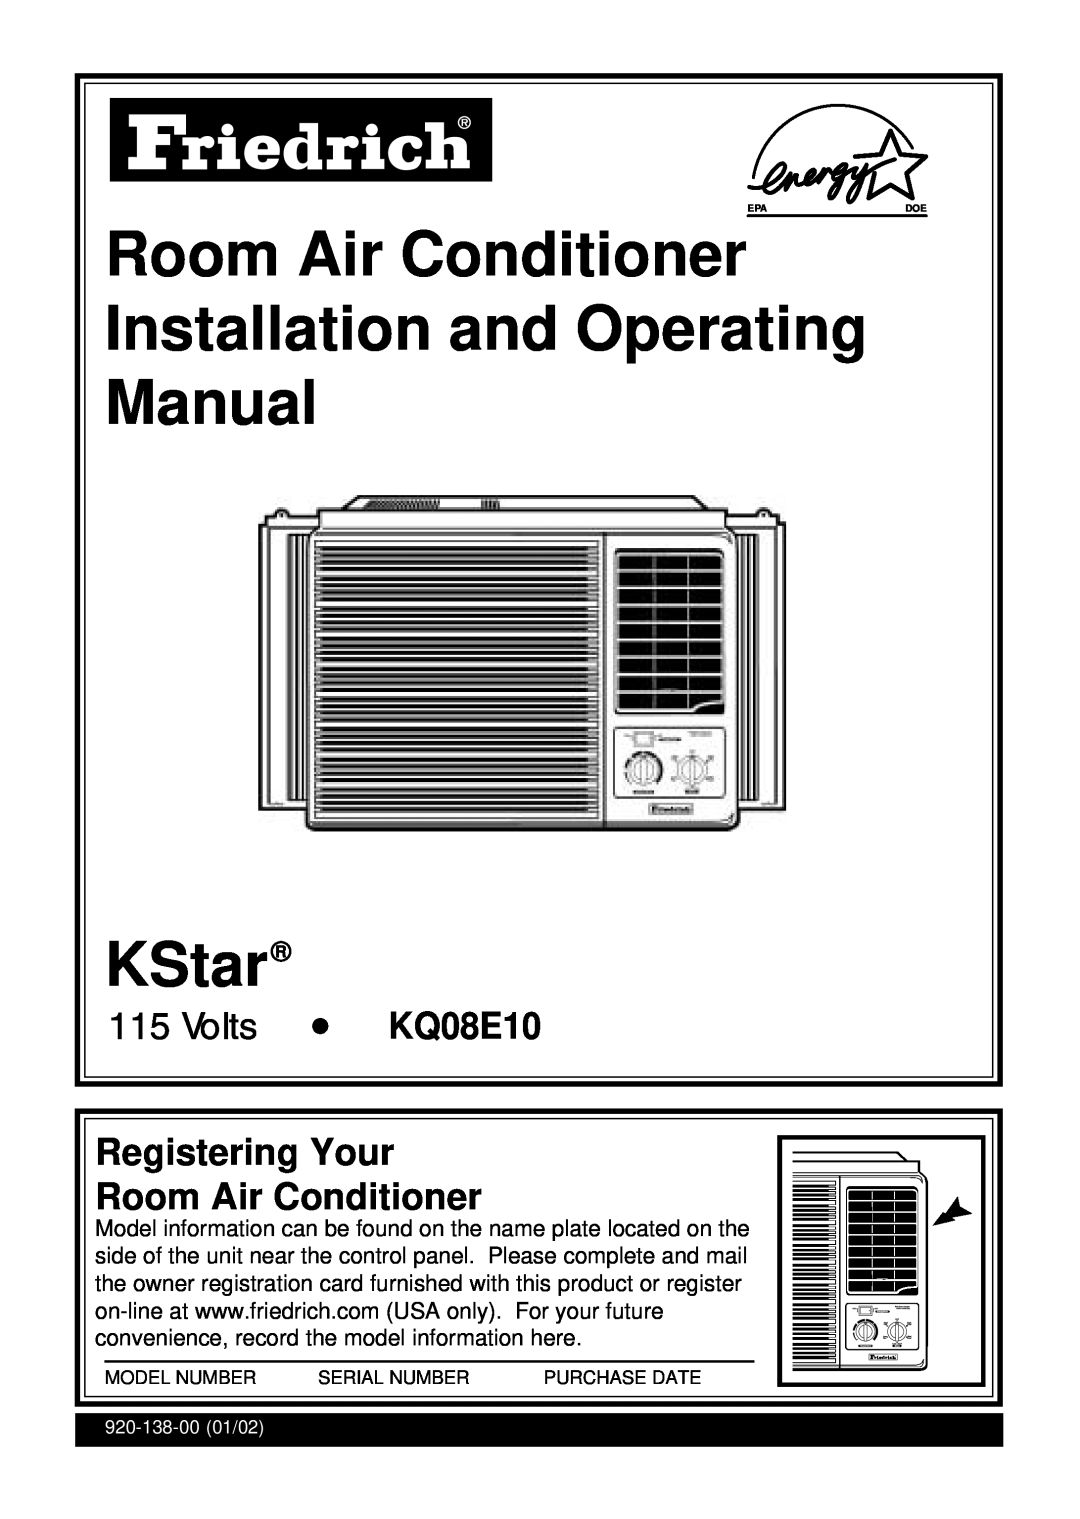 Friedrich manual KQ08E10 Registering Your Room Air Conditioner, Room Air Conditioner Installation and Operating 